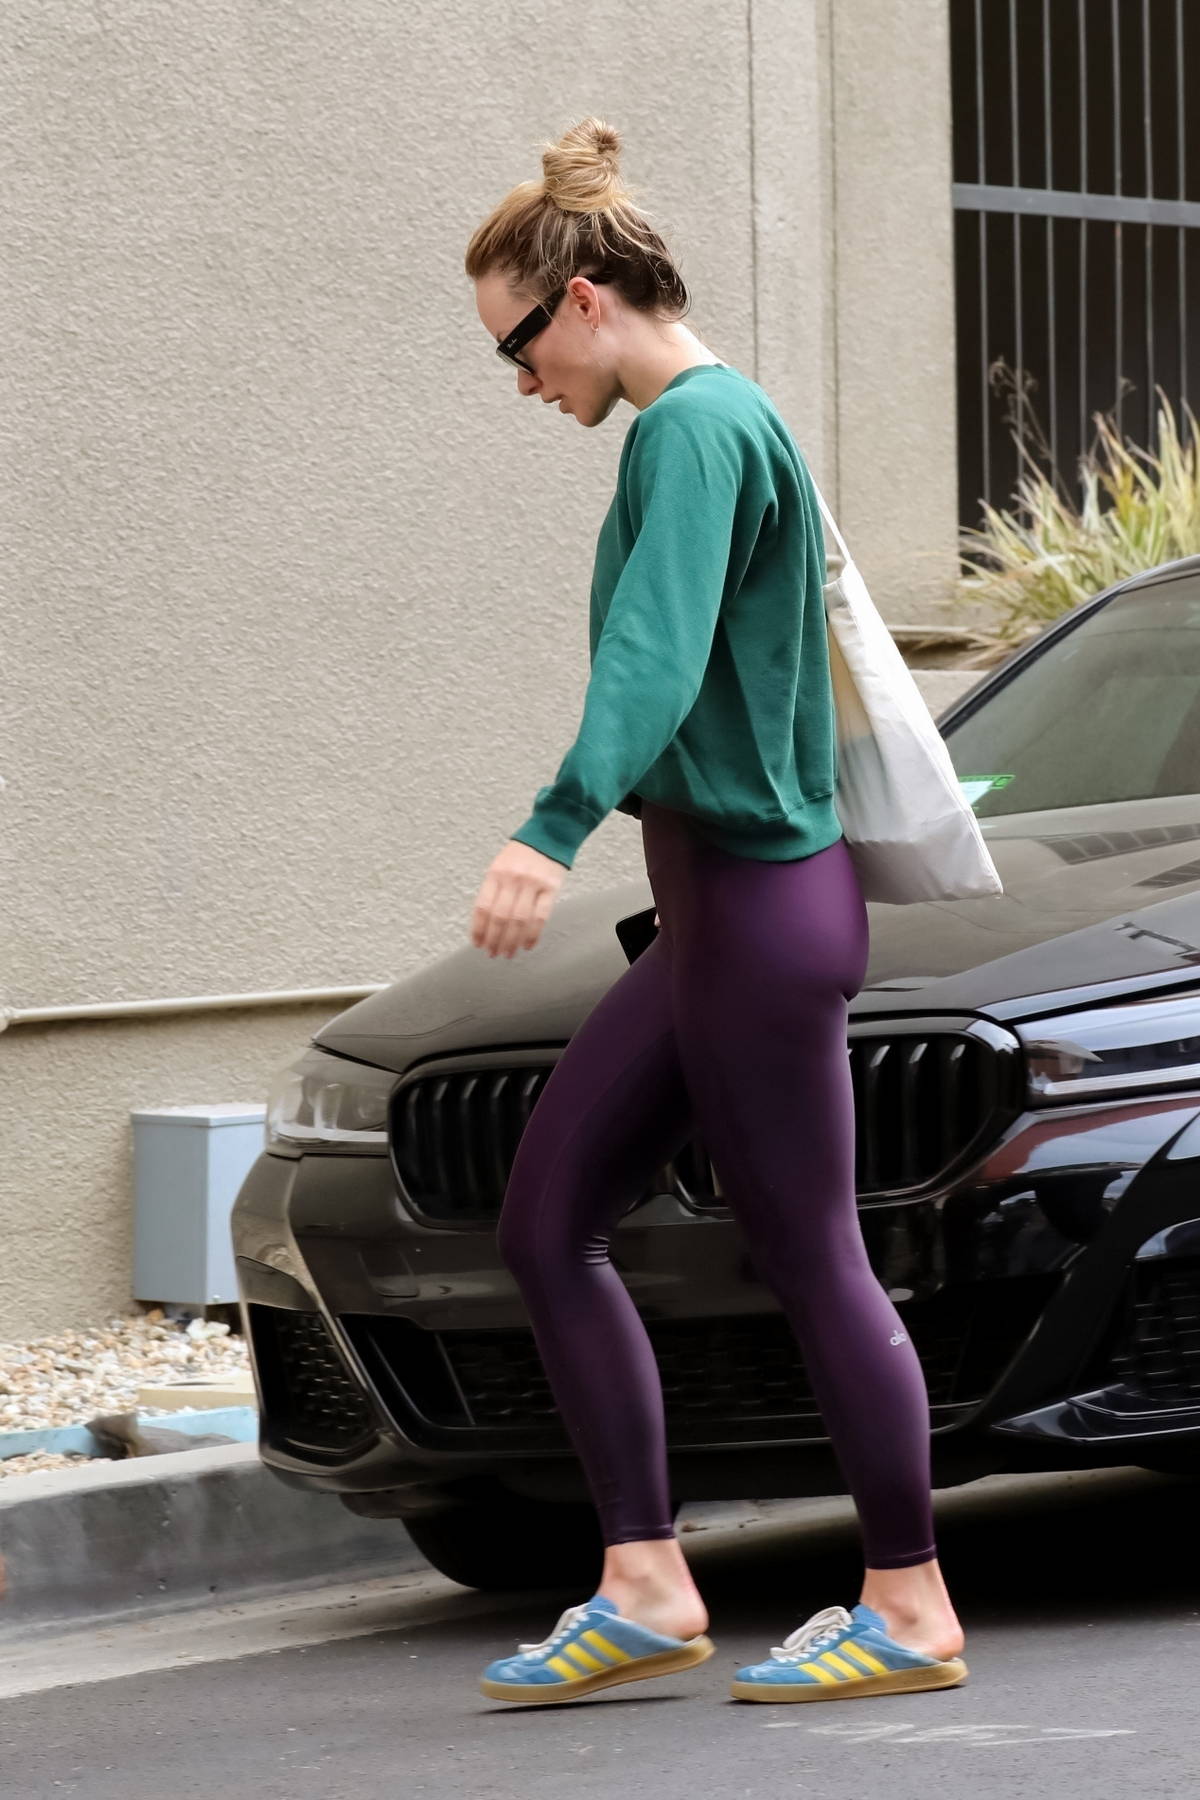 Olivia Wilde wears a teal-green sports bra and leggings with a Gucci  sweater while attending her daily workout in Studio City,  California-210423_15